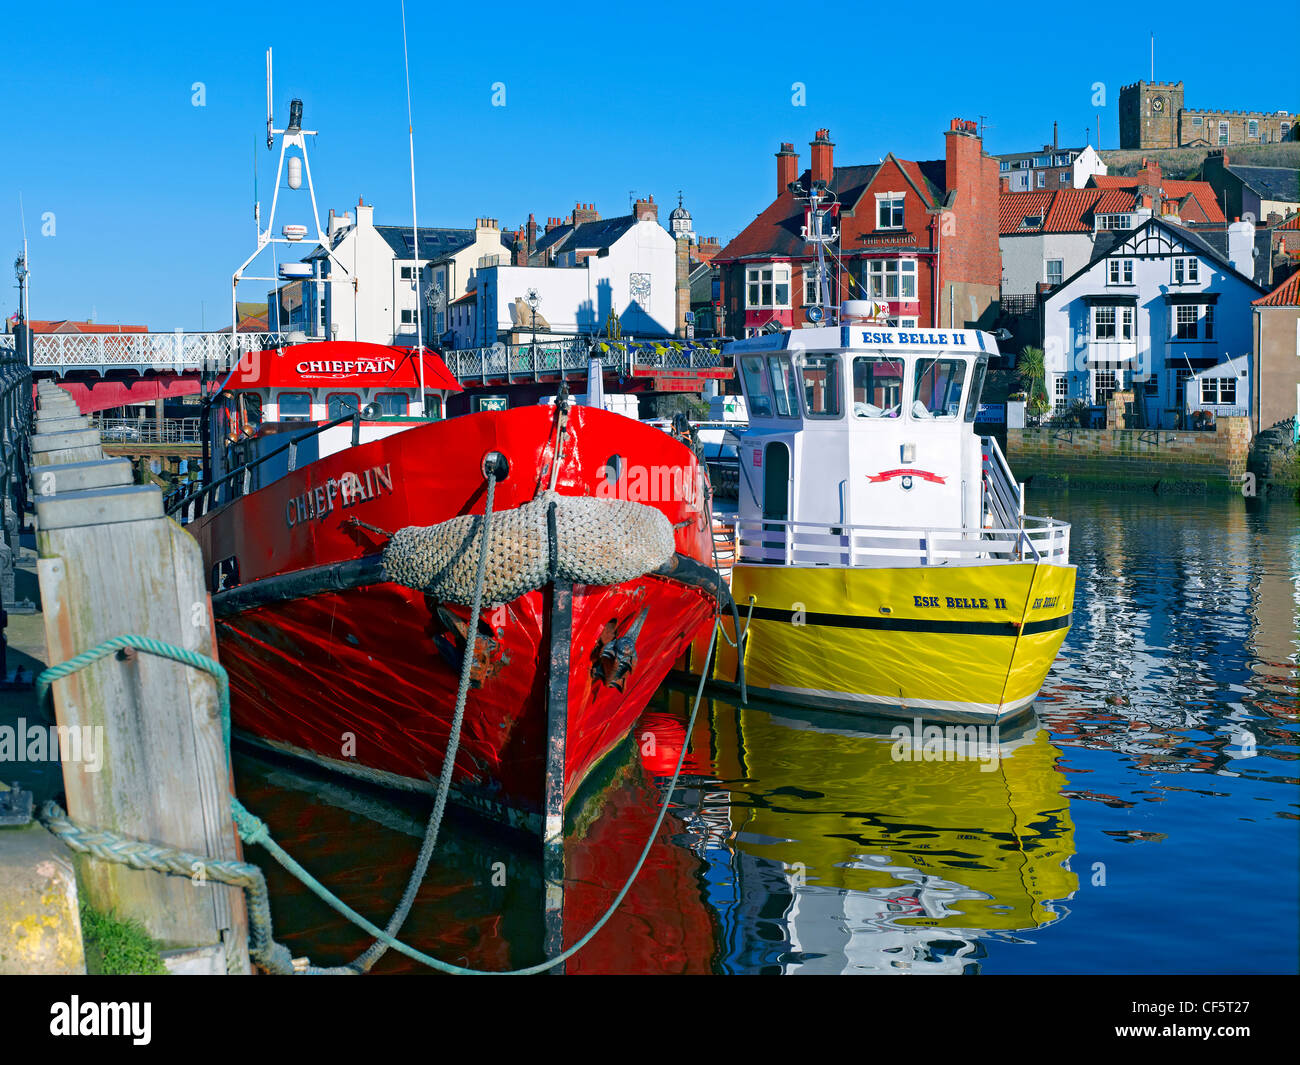 St Mary's Church on East Cliff overlooking fishing boats moored in the harbour. Stock Photo